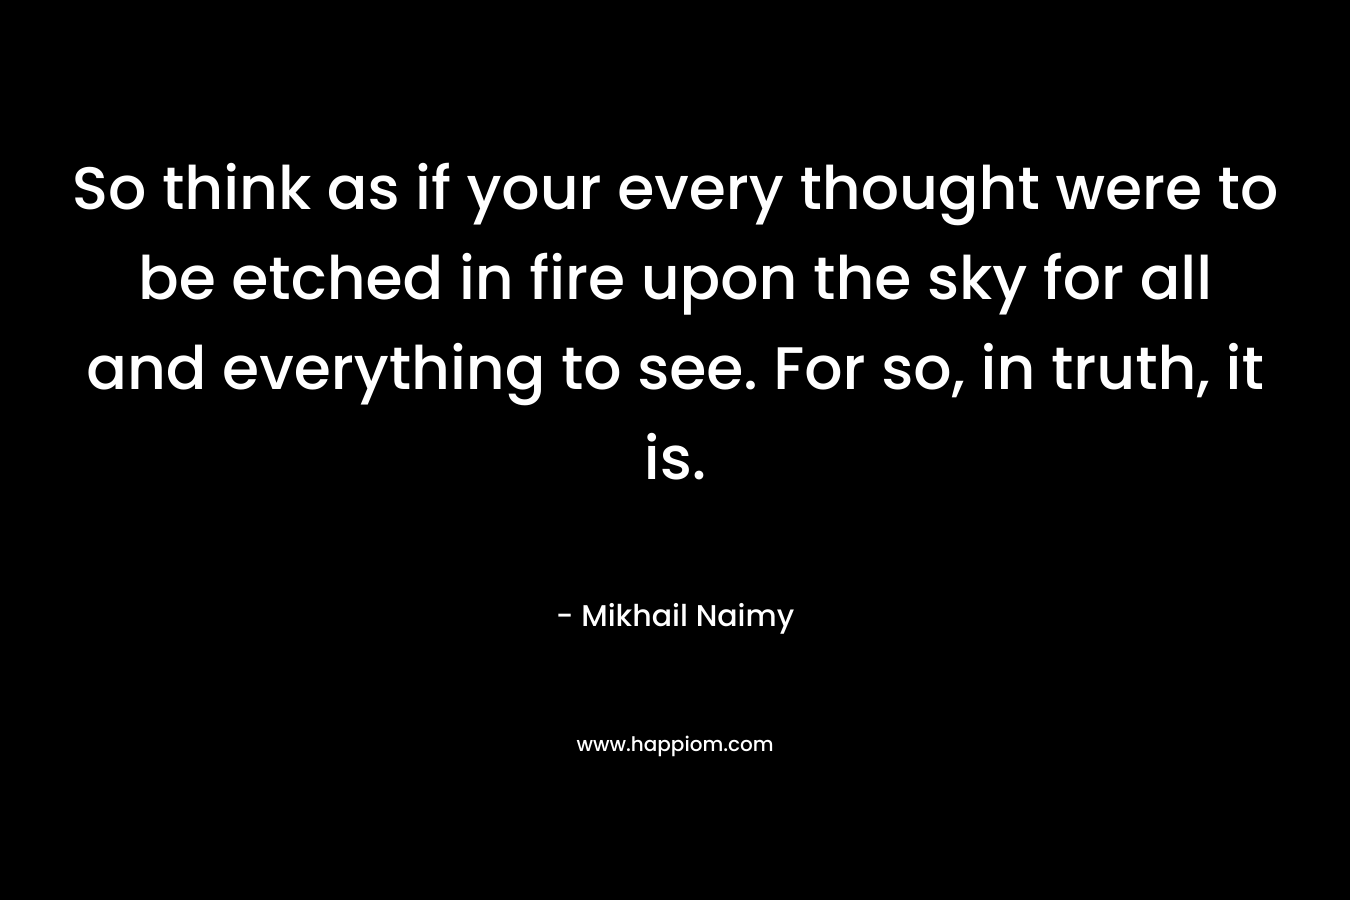 So think as if your every thought were to be etched in fire upon the sky for all and everything to see. For so, in truth, it is.